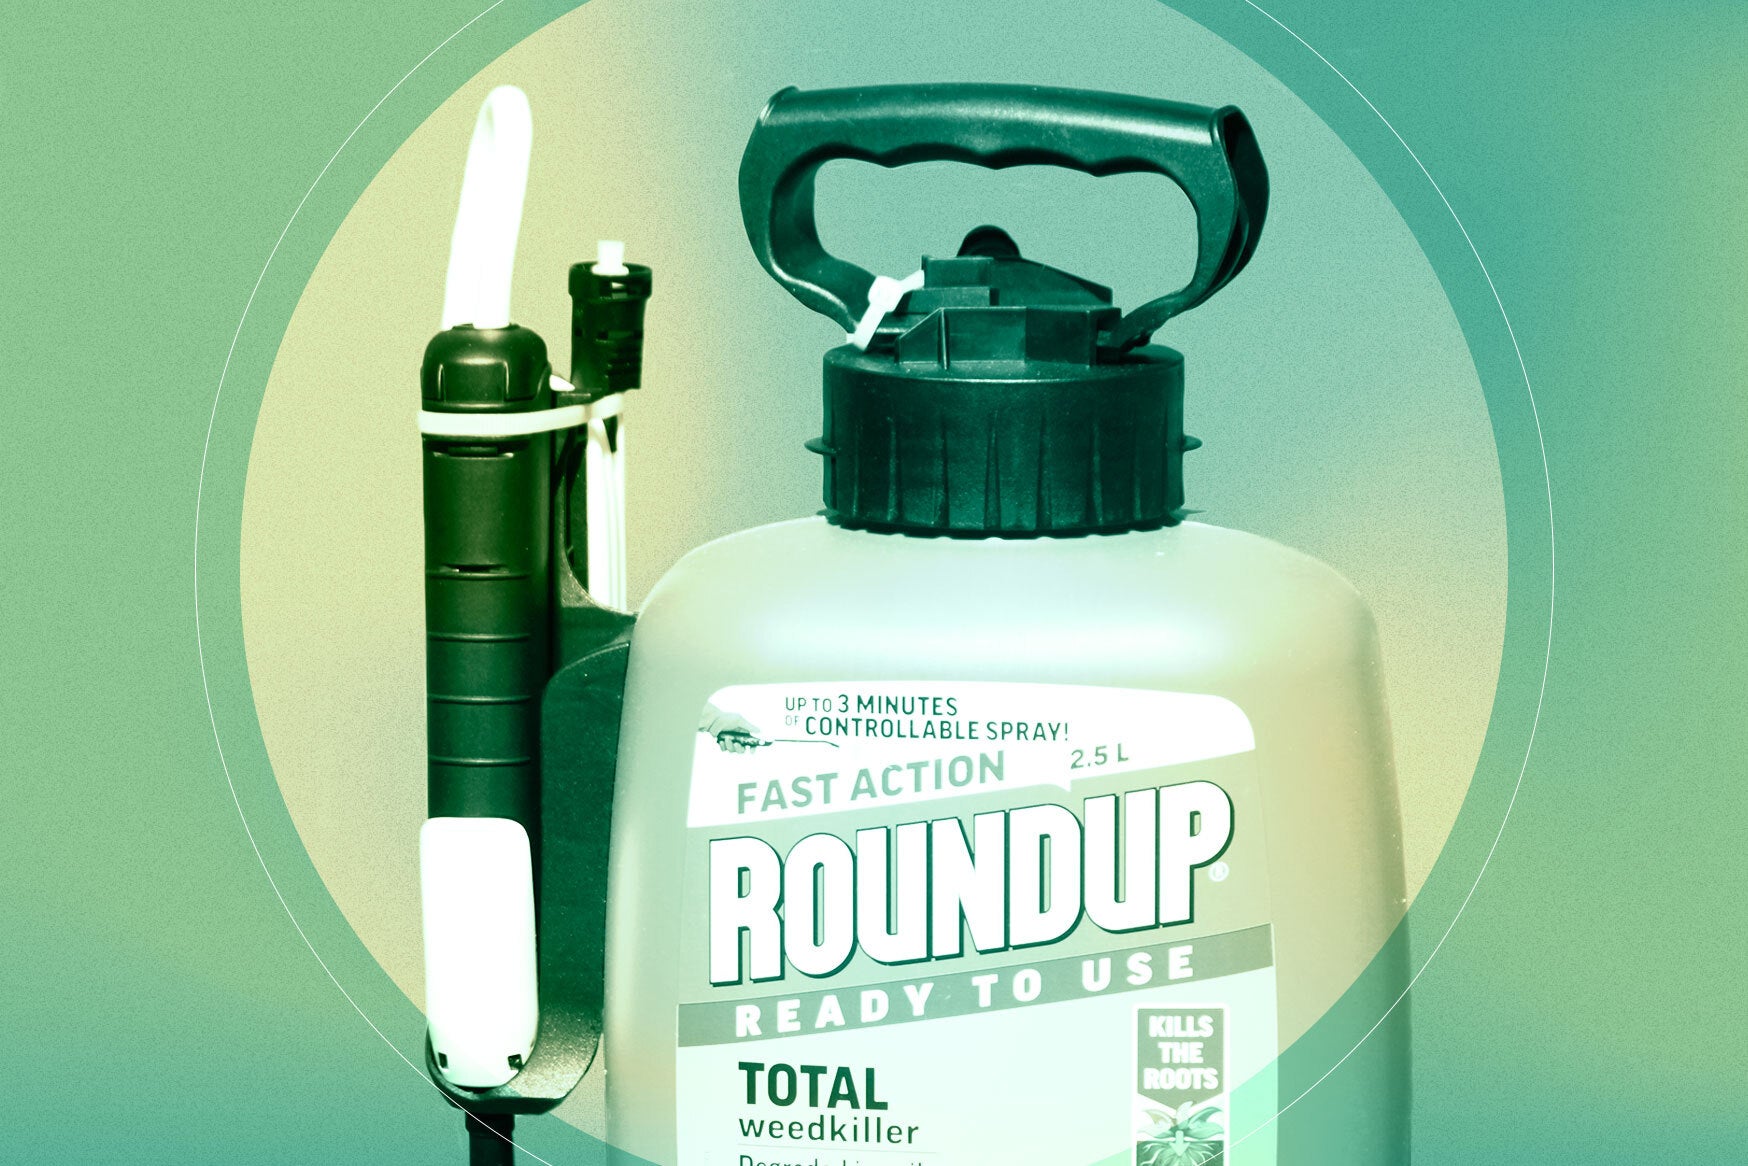 This Roundup ingredient might cause cancer—but the EPA won’t ban it thumbnail